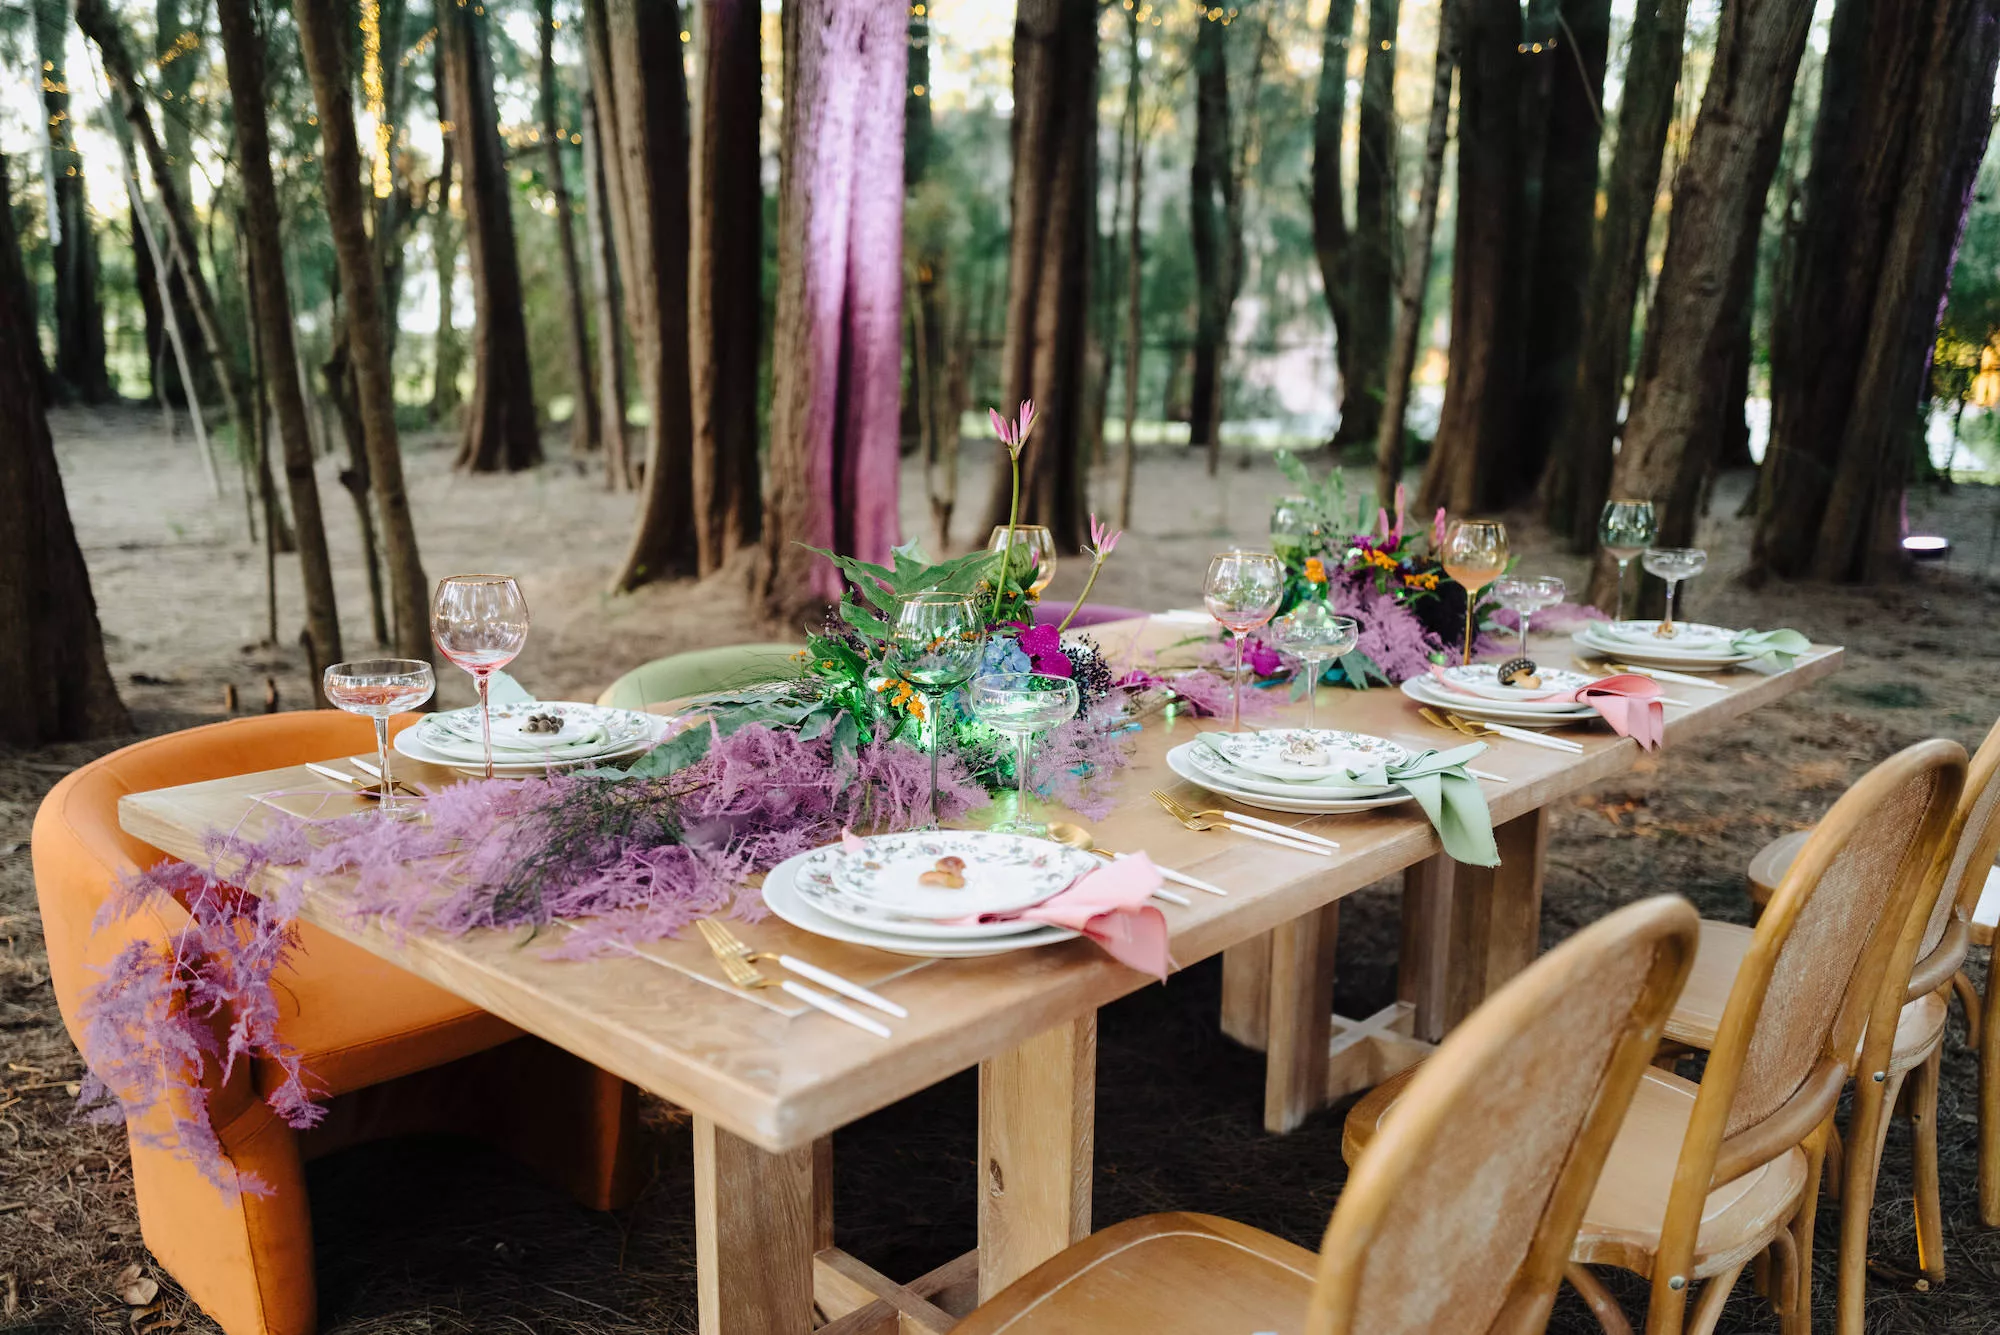 Whimsical Forest Wedding Reception Tablescape Centerpiece Ideas with Purple Ferns, Blue Hydrangeas, and Purple Orchids | Tampa Bay Event Planner Wilder Mind Events | Outdoor Private Estate Wedding Venue Royal Pine Estate